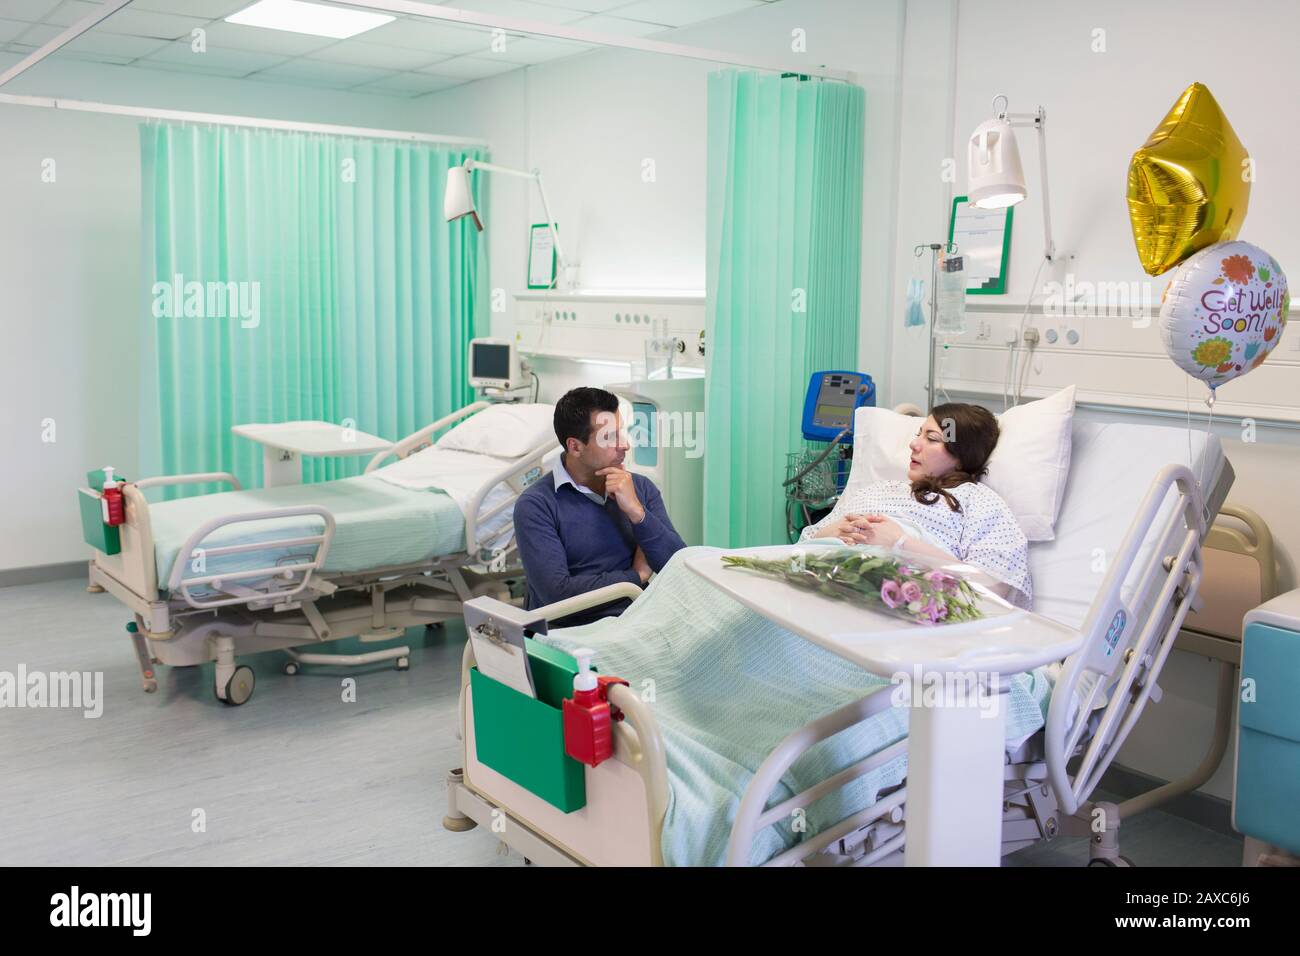 Man visiting, talking with wife resting in hospital ward Stock Photo